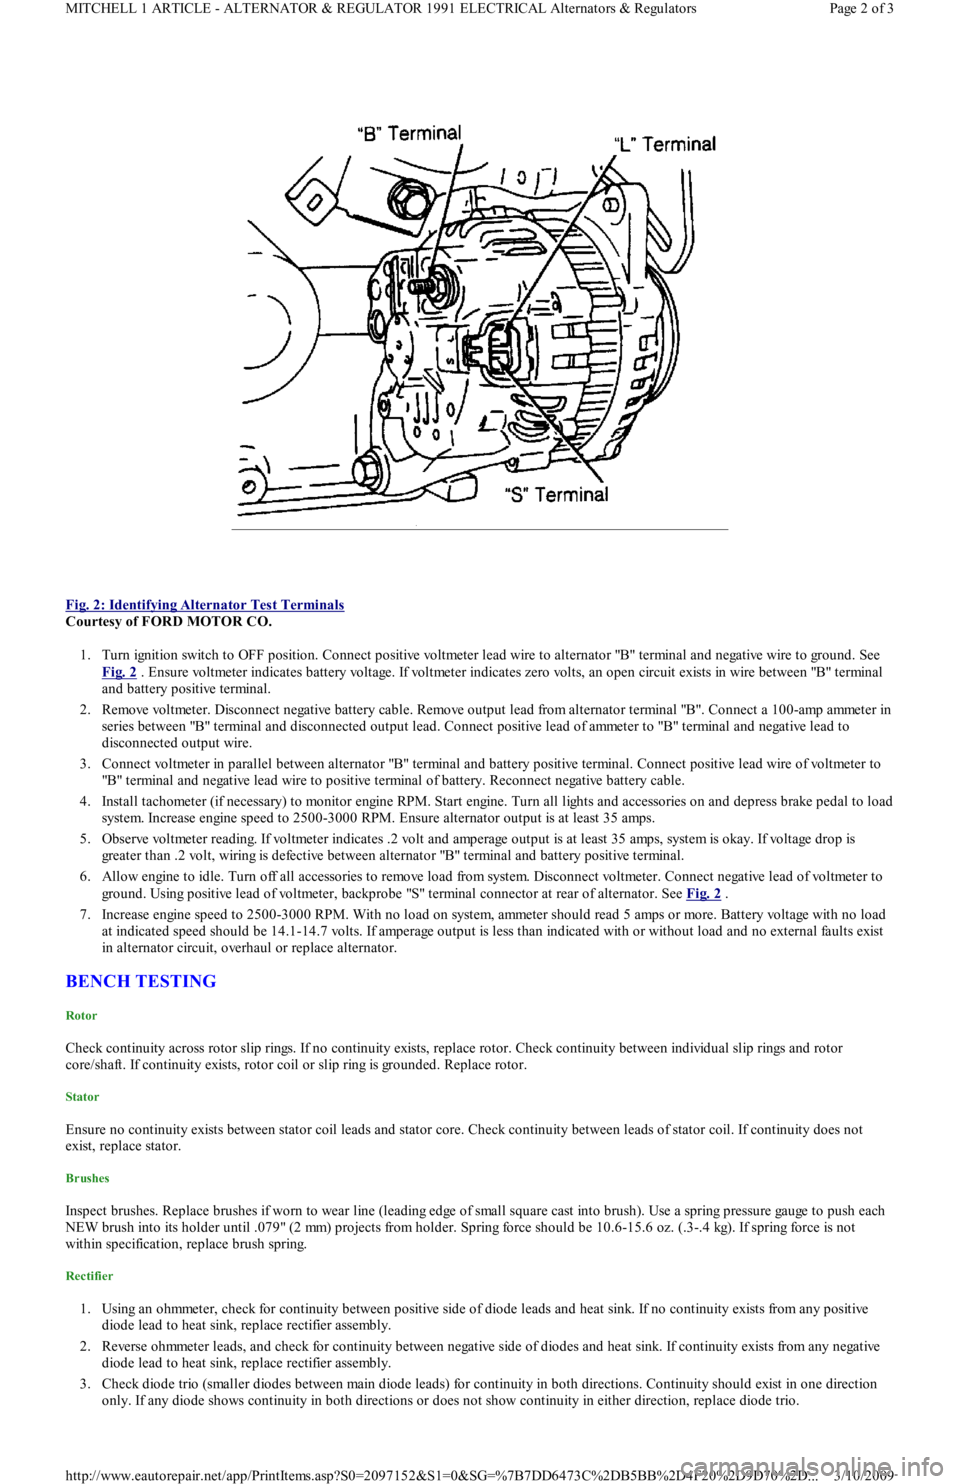 FORD FESTIVA 1991 Workshop Manual  
Fig. 2: Identifying Alternator Test Terminals
 
Courtesy of FORD MOTOR CO. 
1. Turn ignition switch to OFF position. Connect positive voltmeter lead wire to alternator "B" terminal and negative wire